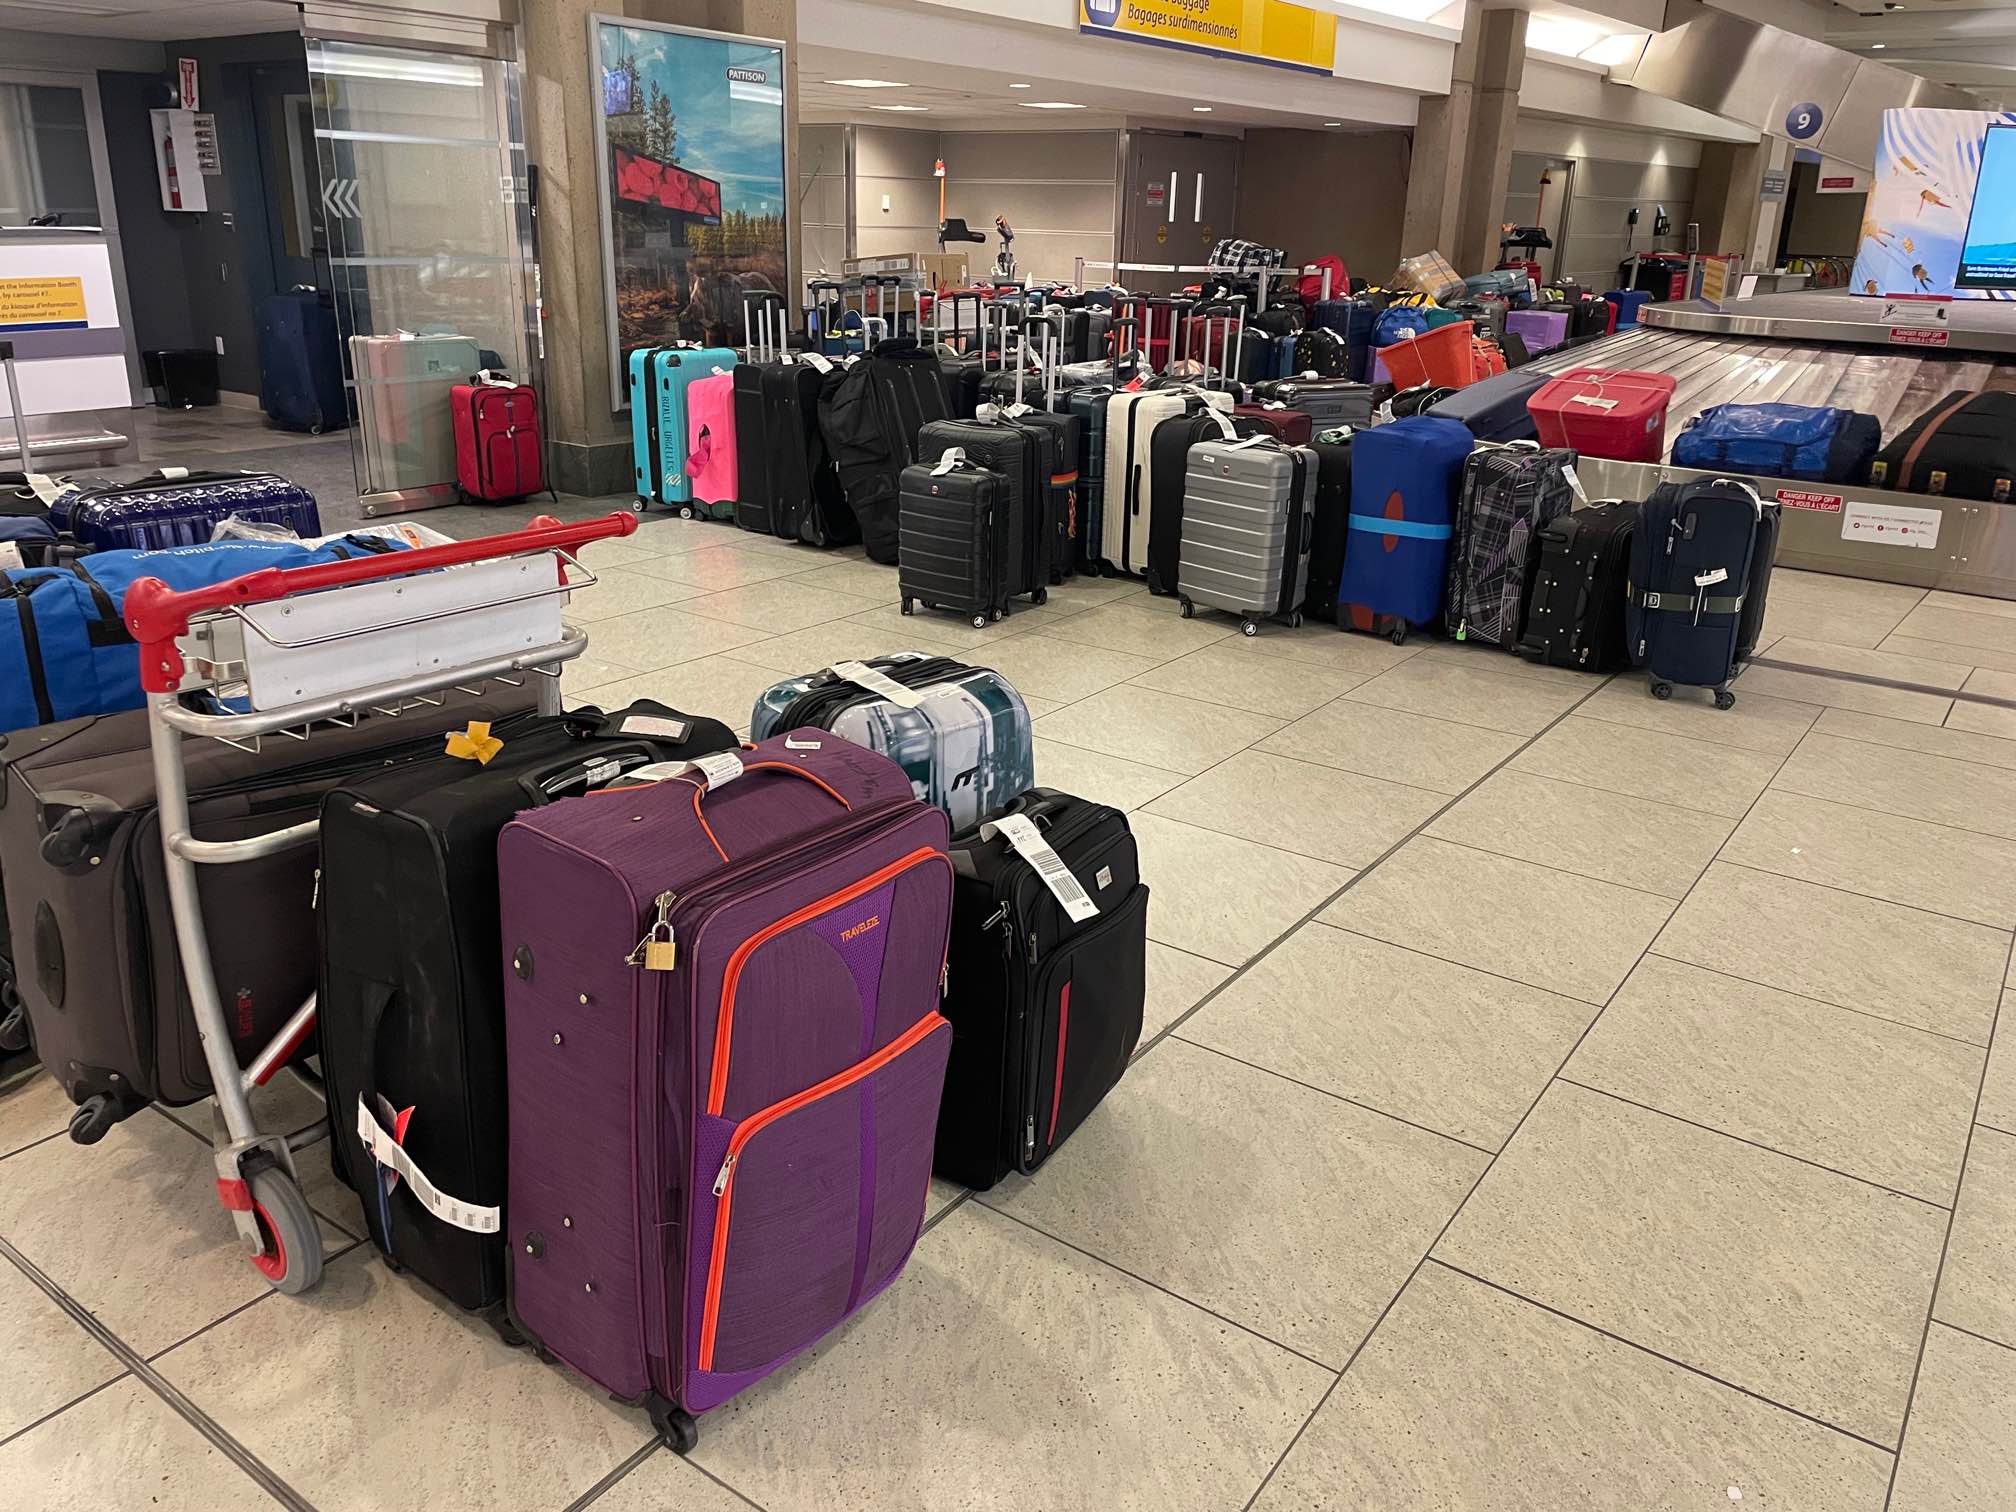 Bags and luggage await departure at the Calgary International Airport